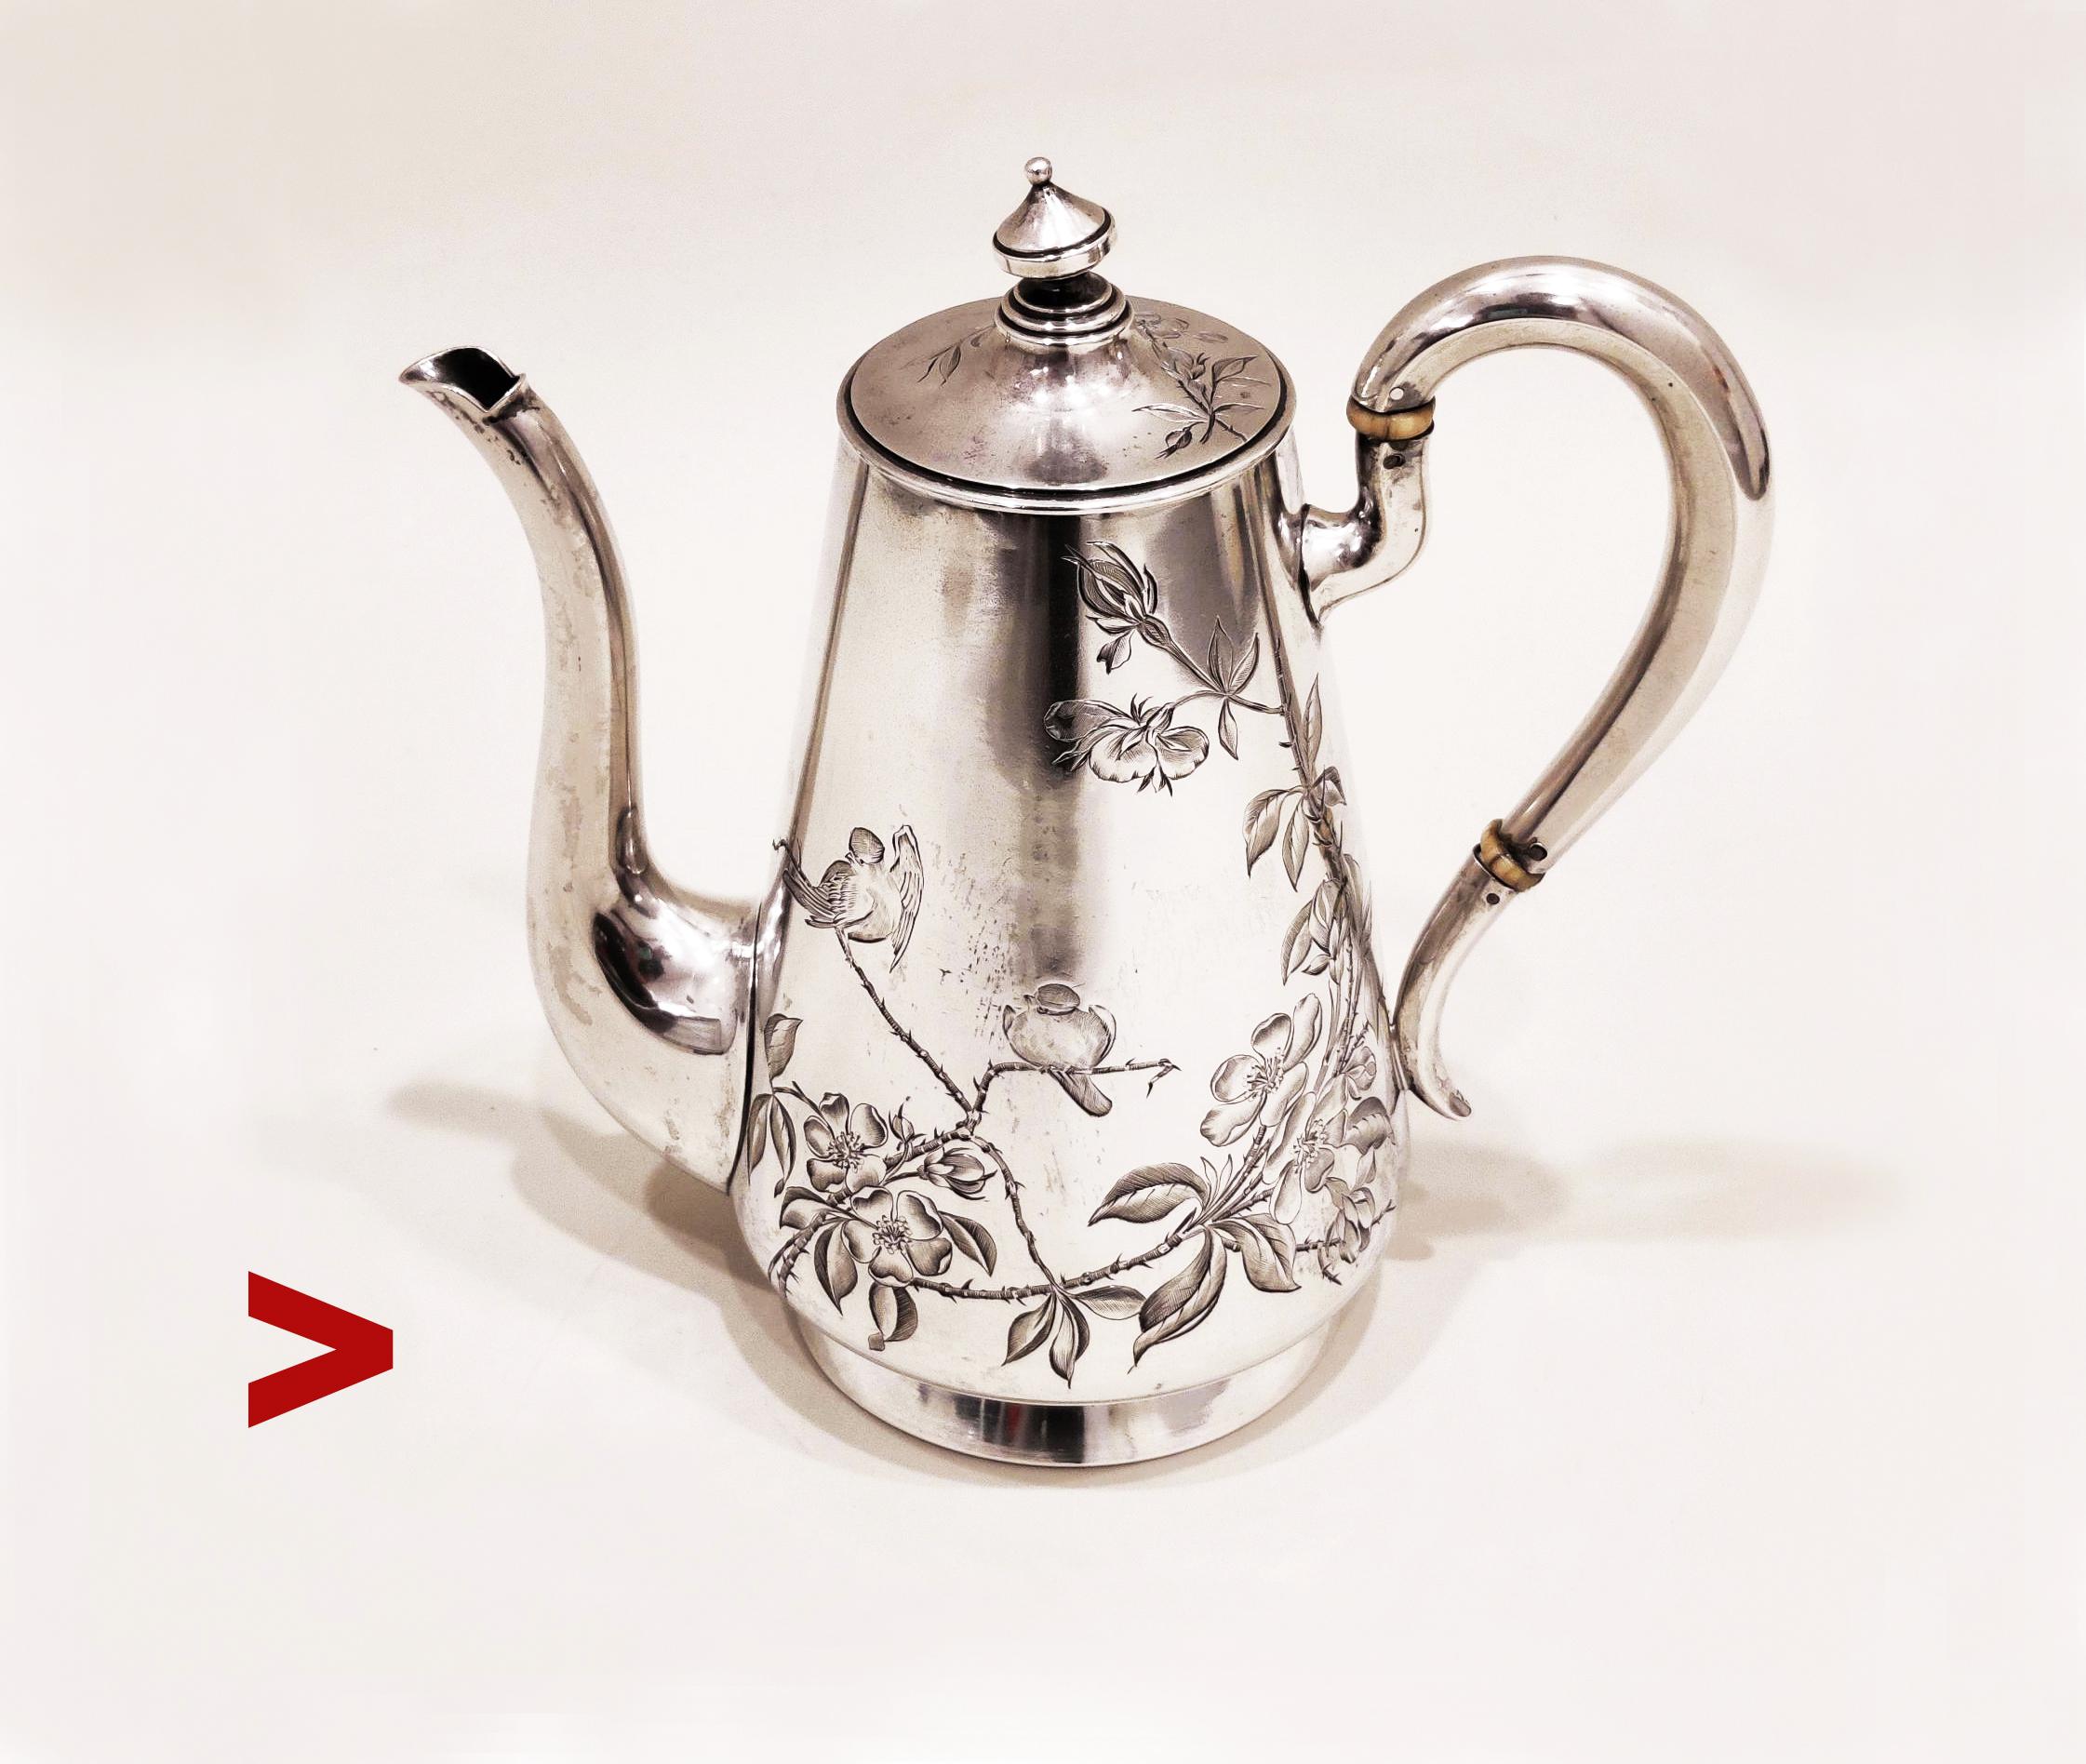 Antique Russian solid 84 Silver Teapot with delicate hand engraved ornament of birds, Skylarks resting on the branches of Dog - rose.

Russian Imperial standard hallmarks confirming solid Silver 84 alloy , used between 1908 -1917 , Moscow,